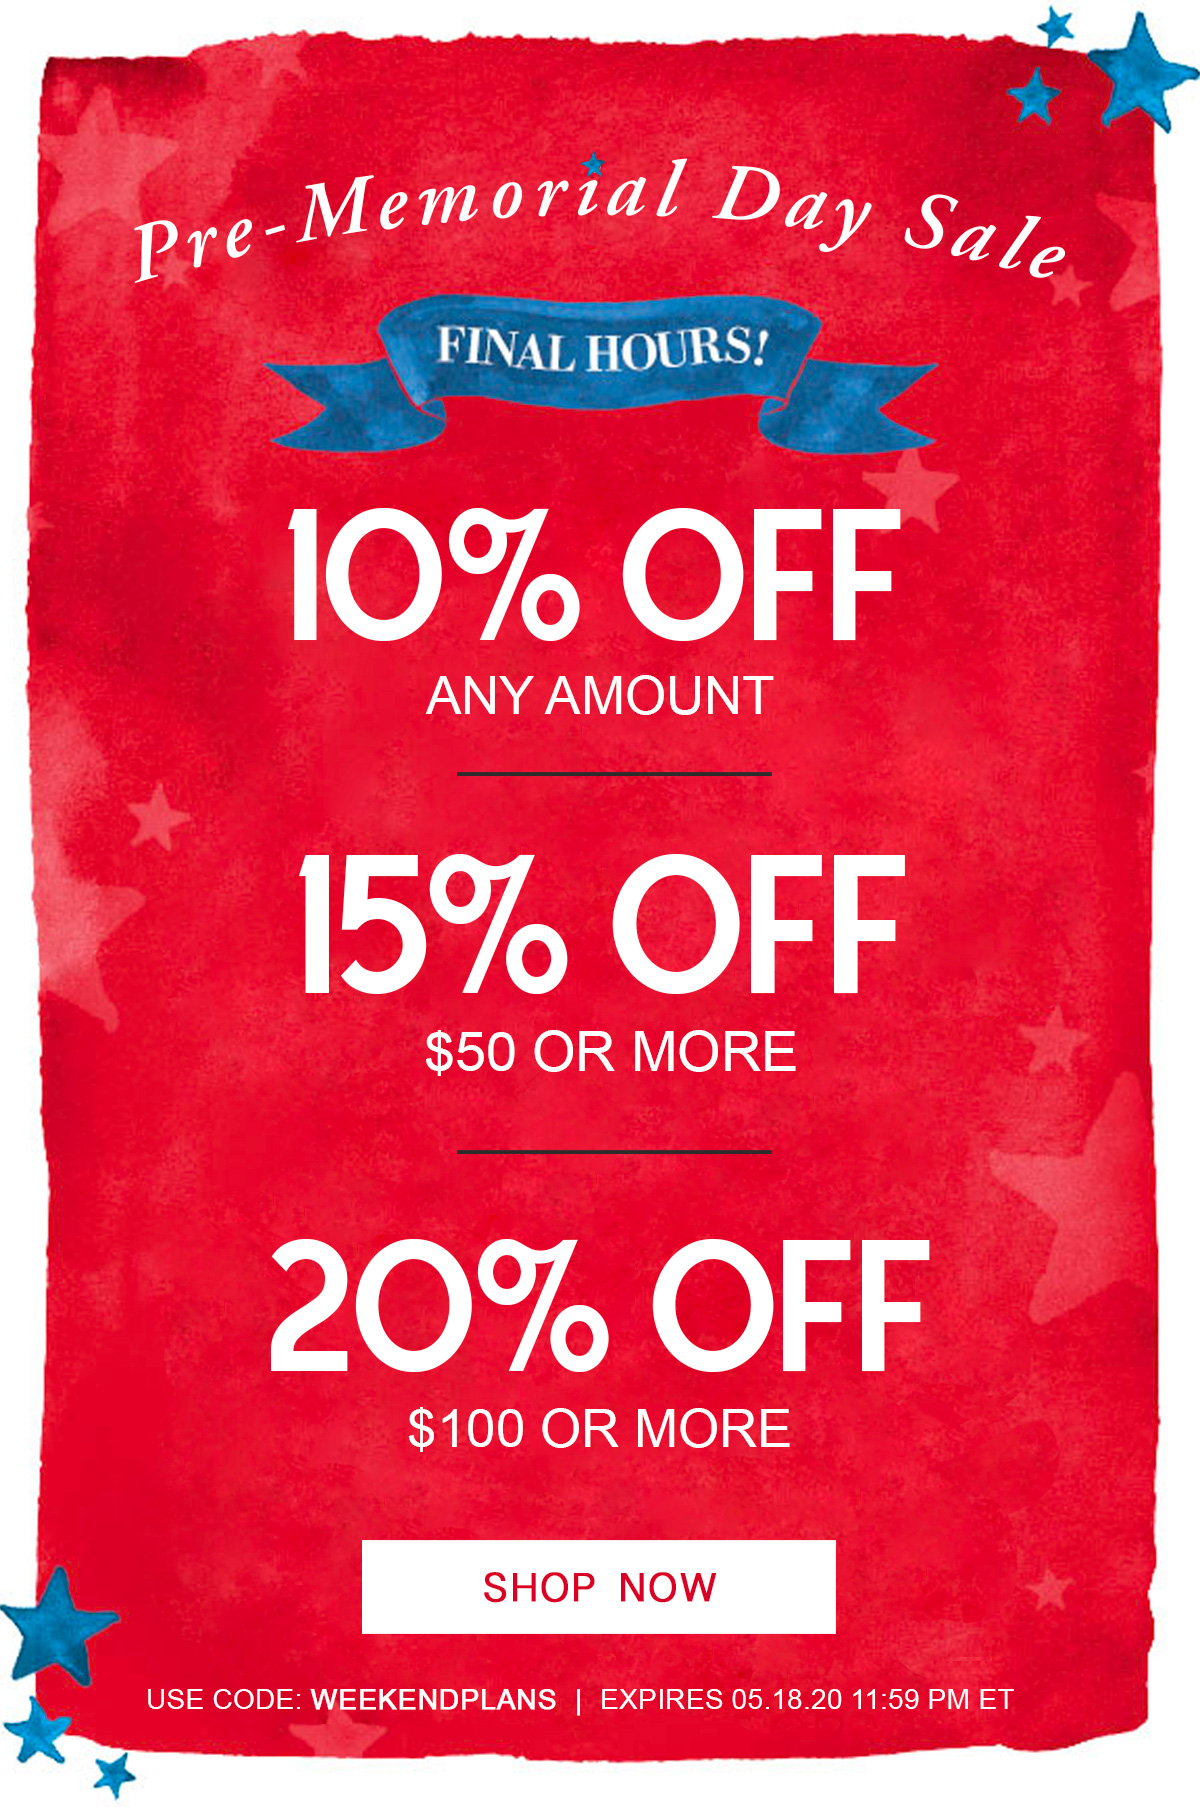 Pre-Memorial Day Sale                          Final Hours  10% Off Any Amount  15% Off $50 or More  20% Off $100 or More  Shop Now   Use code: WEEKENDPLANS |  Expires 05.18.20 11:59 PM ET